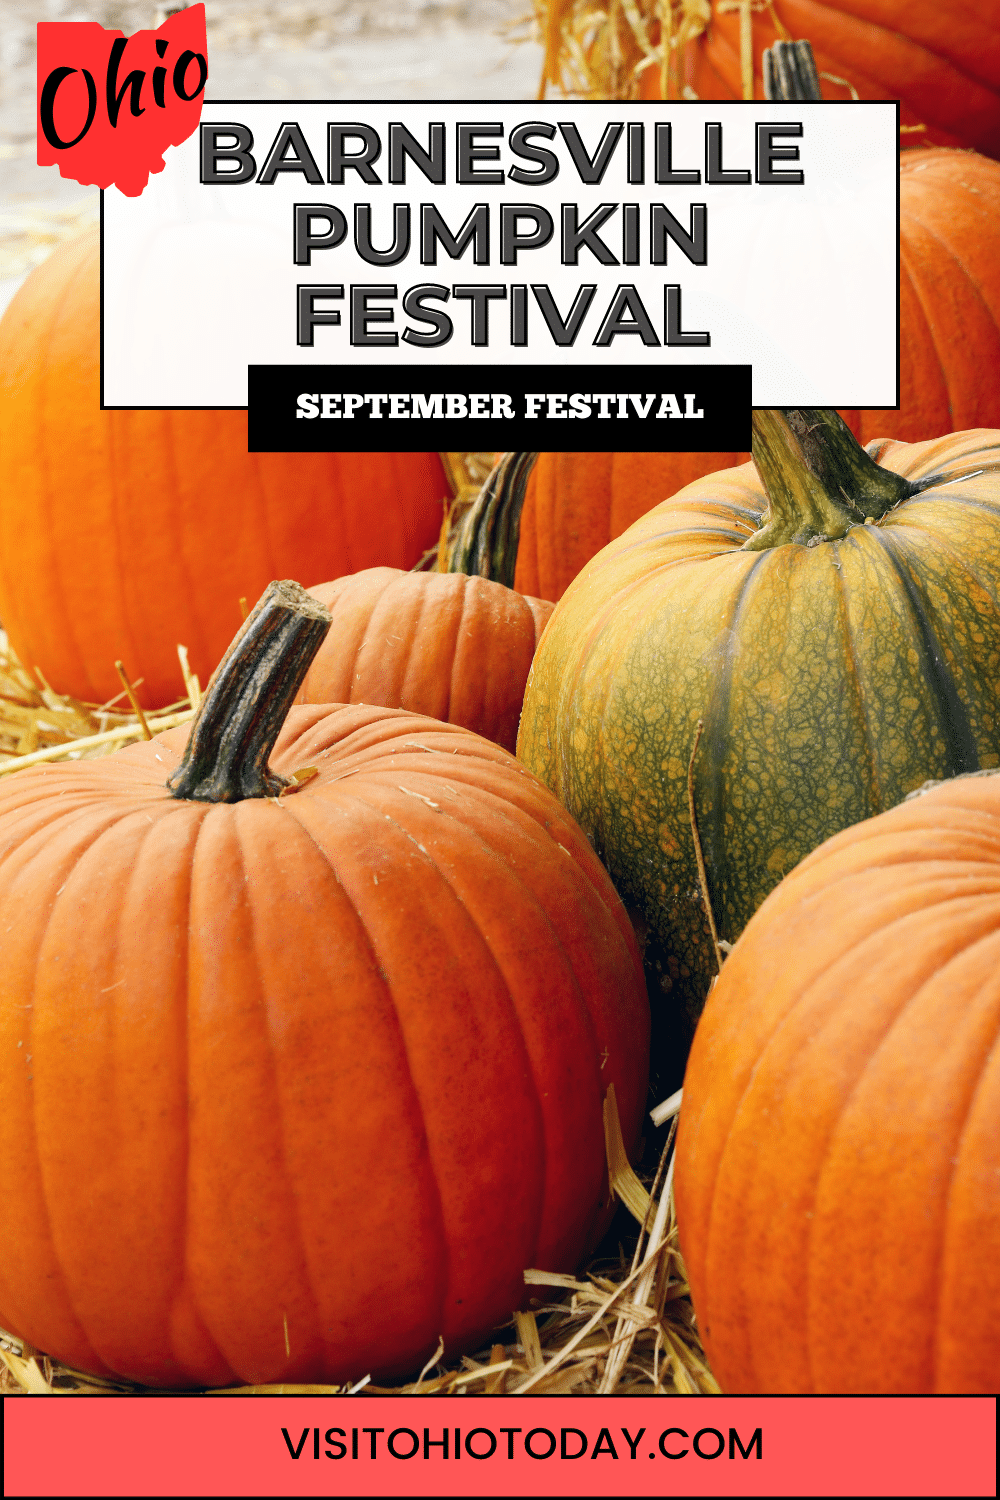 The Barnesville Pumpkin Festival is a four-day event, held on September 21-24, 2023 with a variety of activities for all ages. It features agricultural and horticultural displays, an antique car show, the Giant Pumpkin Parade, and retail window displays.